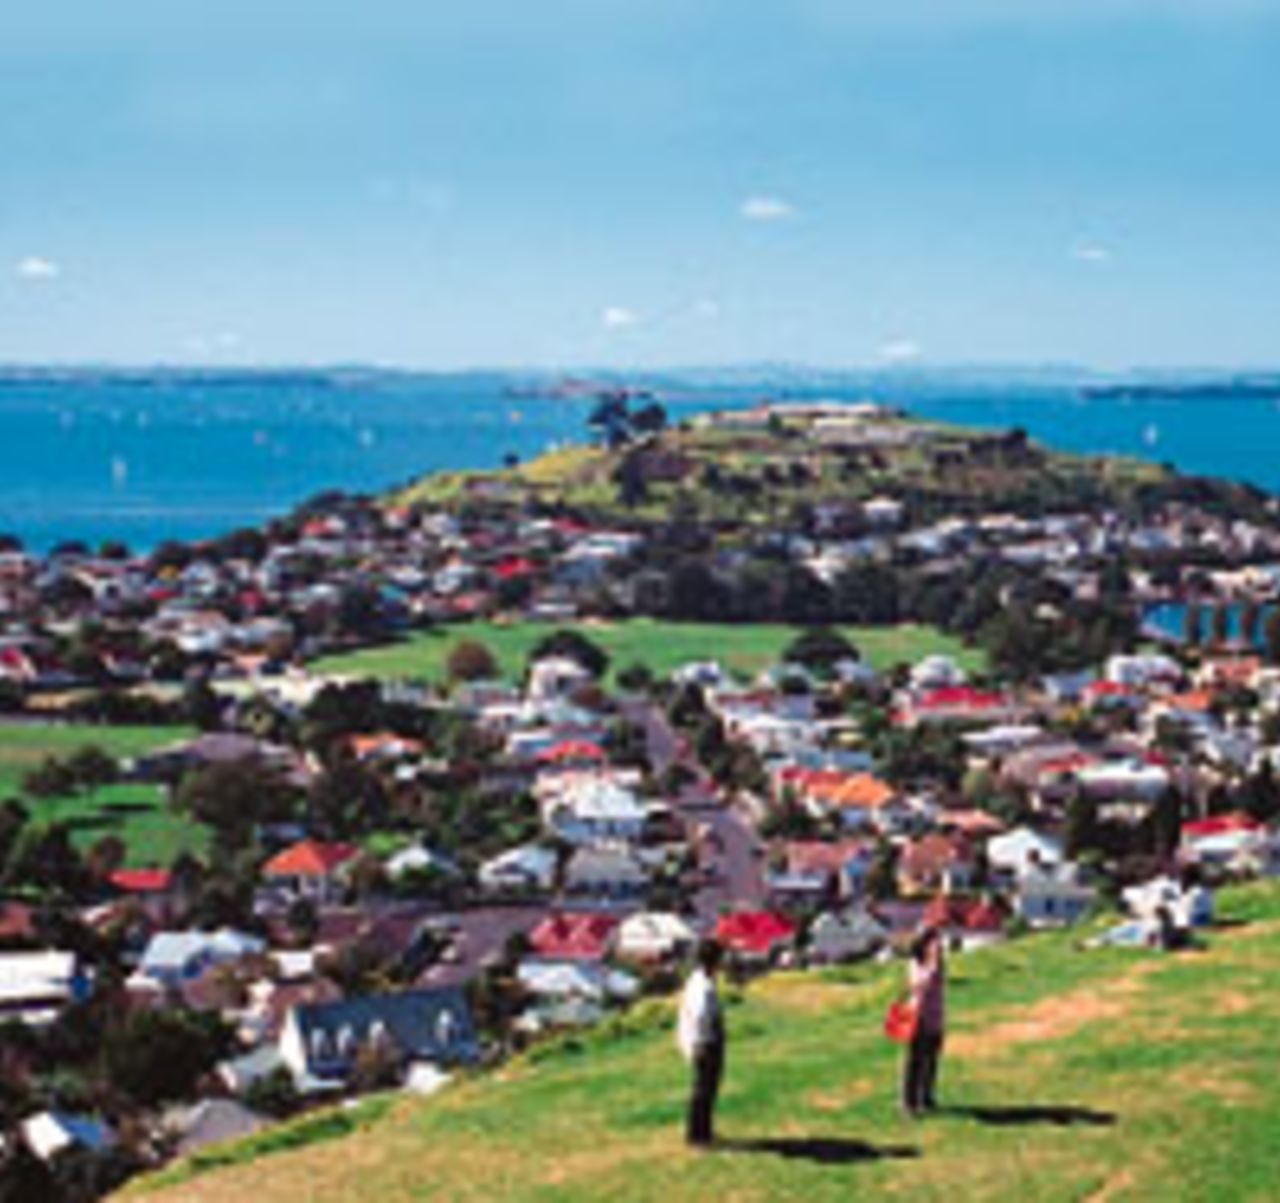 Devonport Domain (centre) as viewed from Mount Victoria looking to the east, with North Head and the Hauraki Gulf in the background